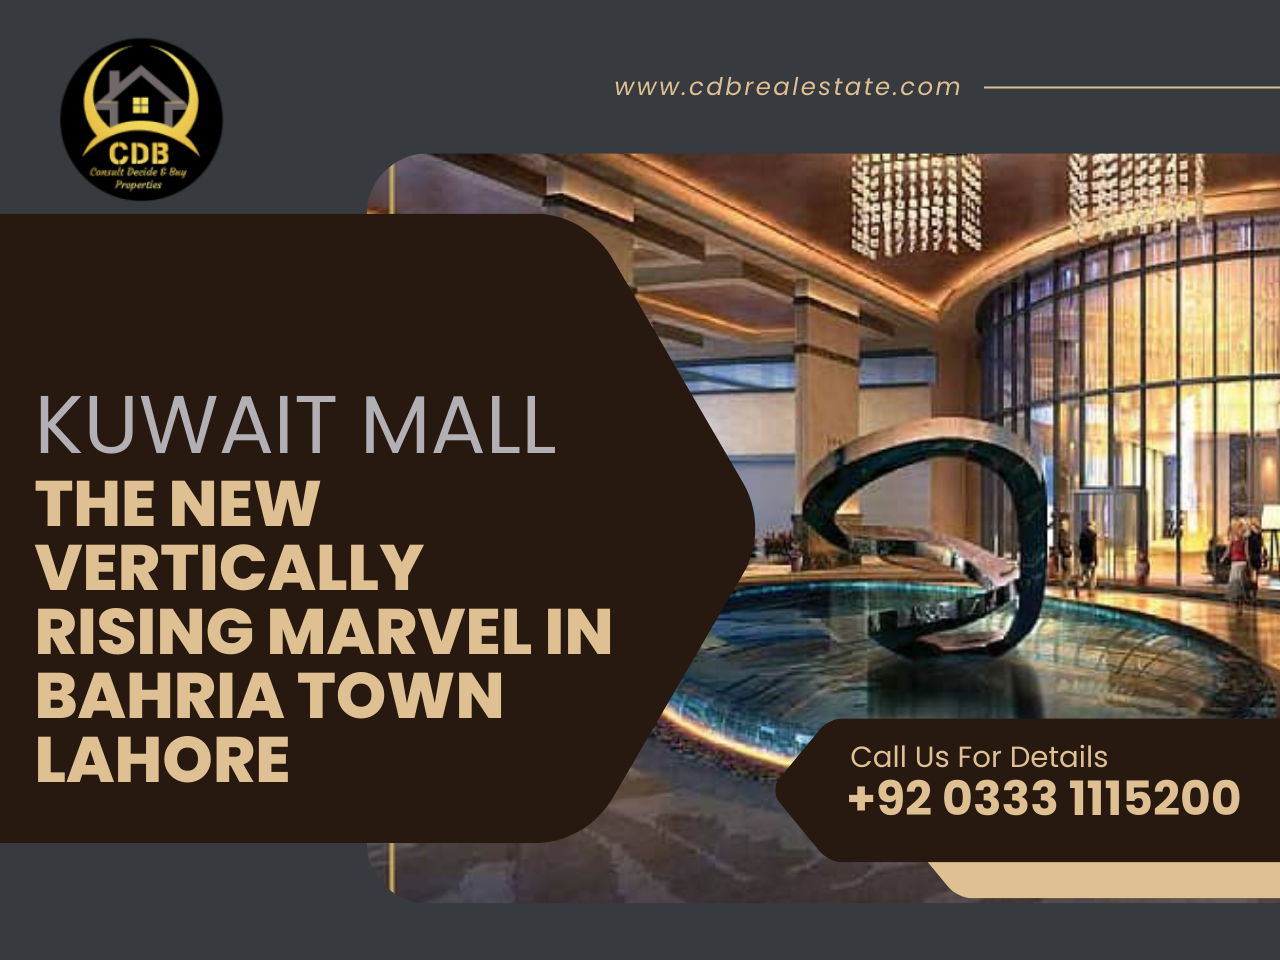 Kuwait Mall: The New Vertically Rising Marvel in Bahria Town Lahore